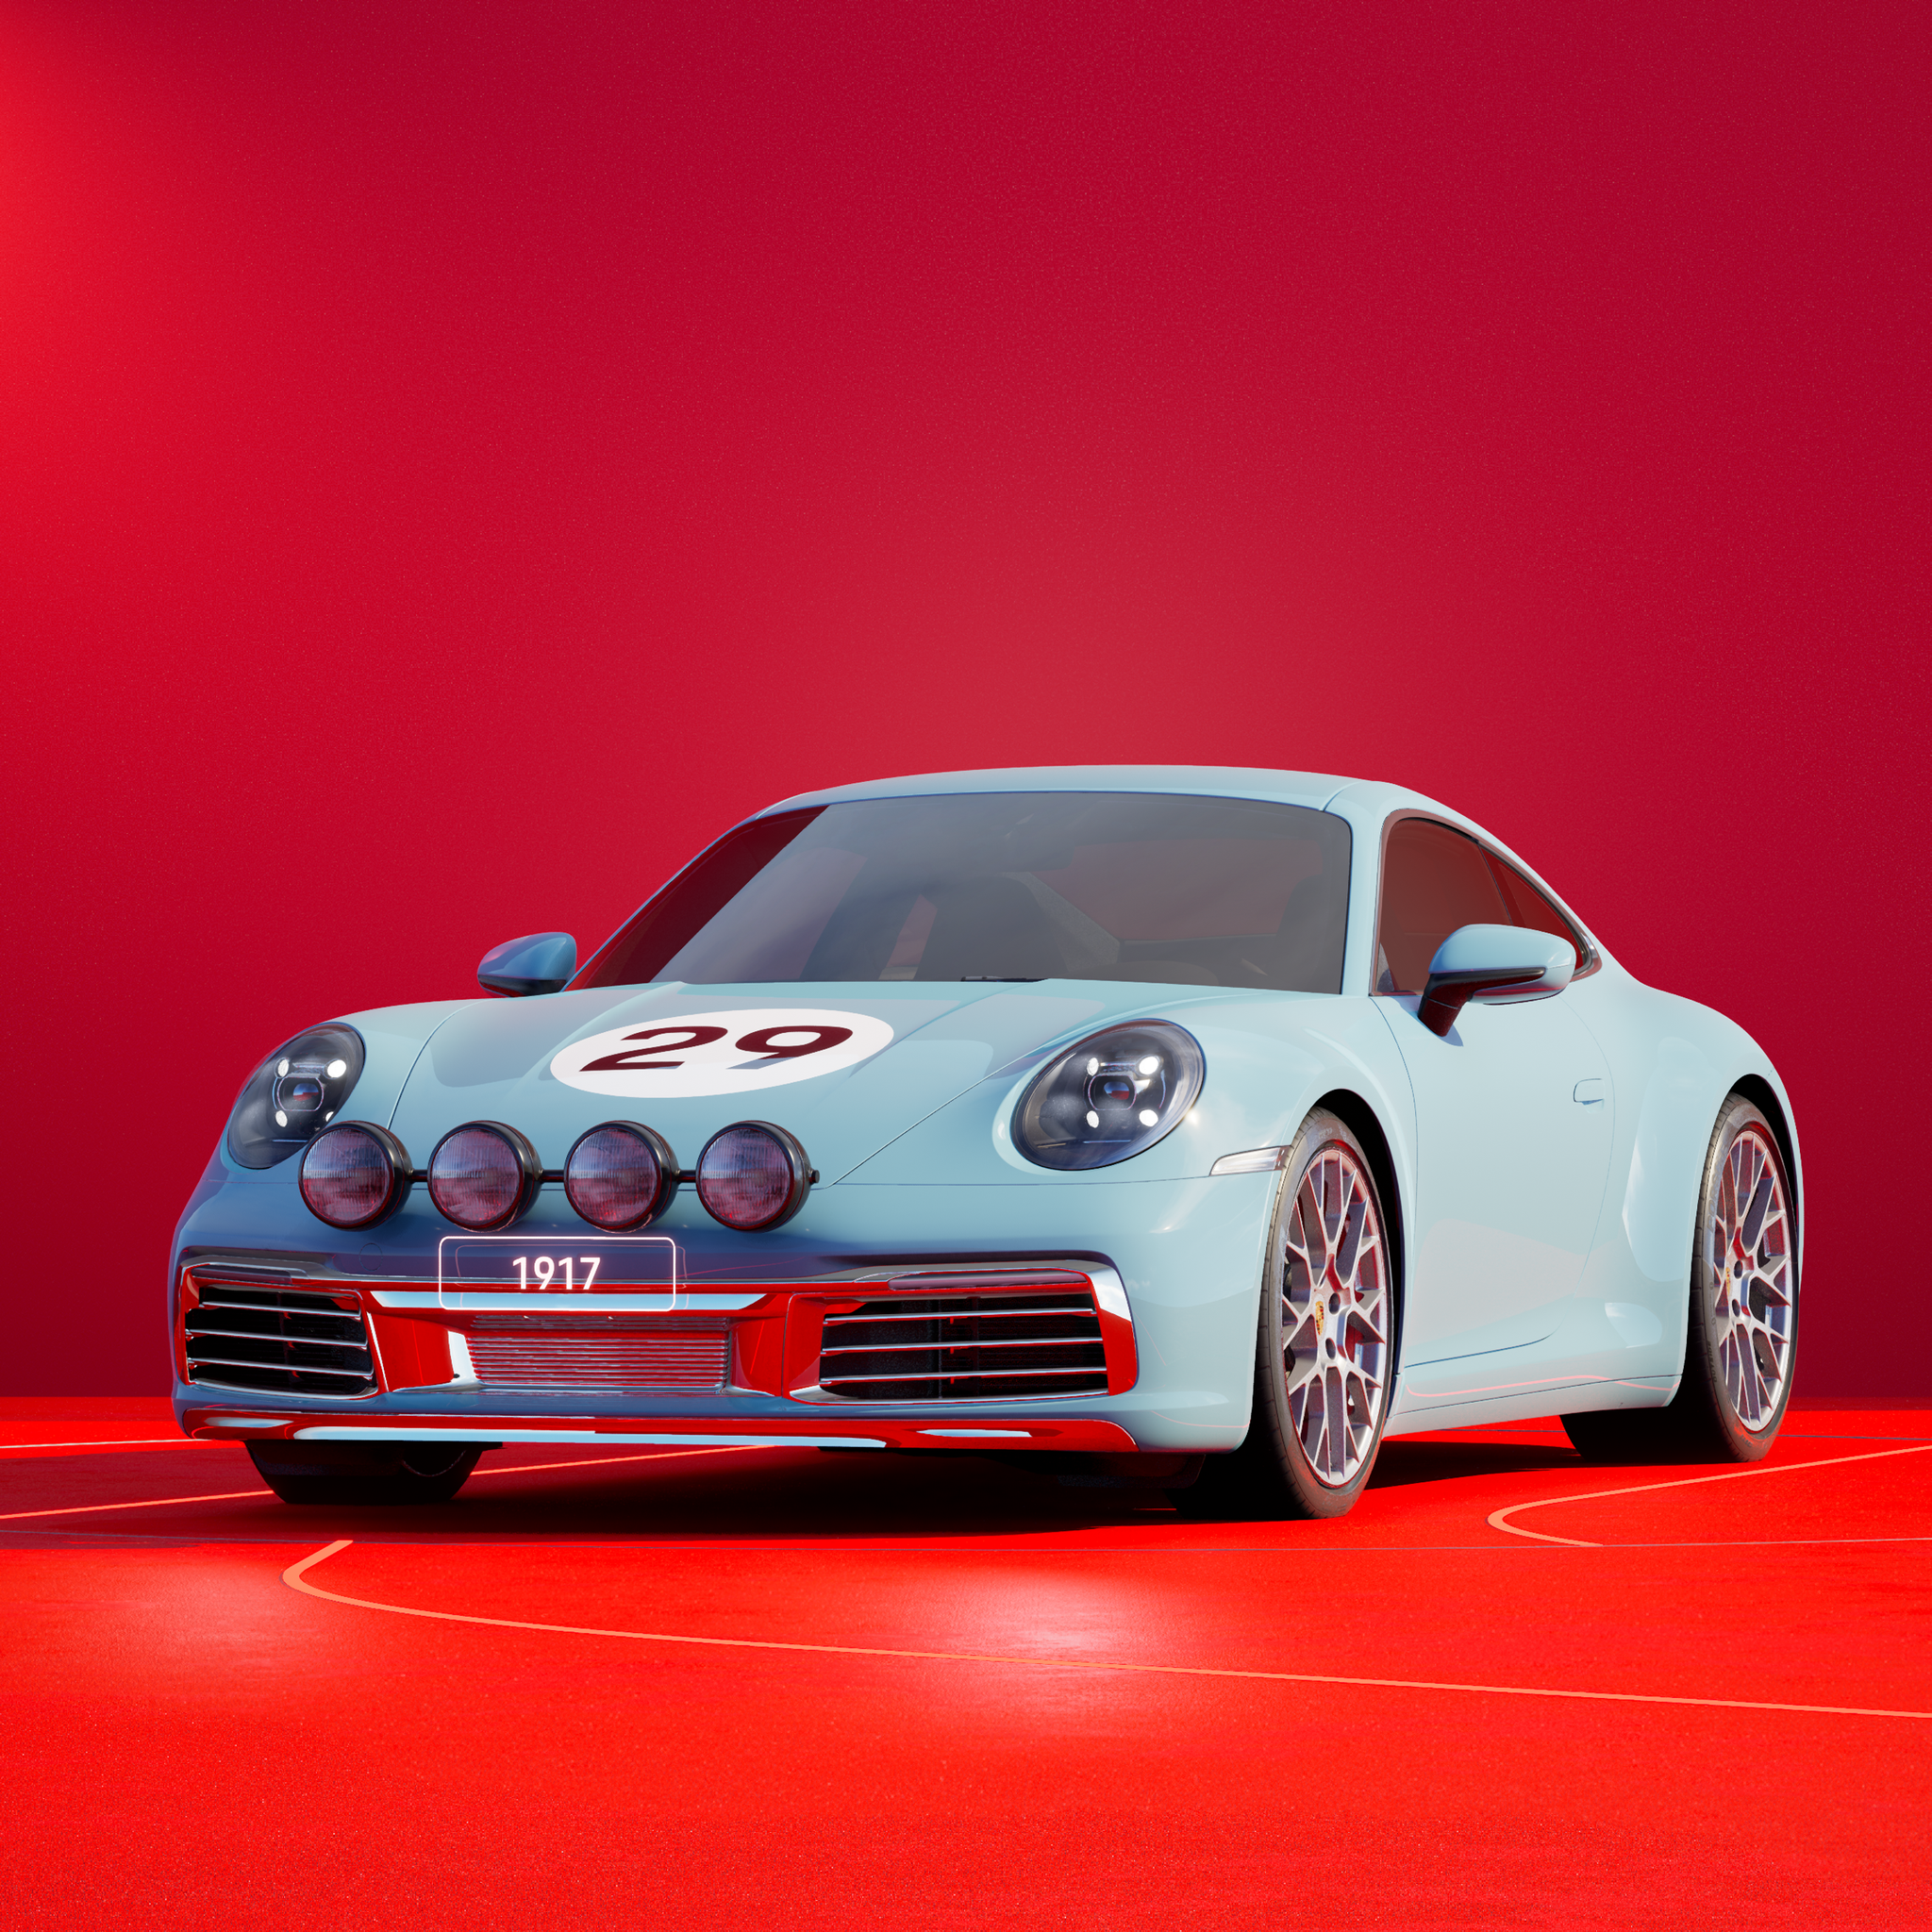 The PORSCHΞ 911 1917 image in phase